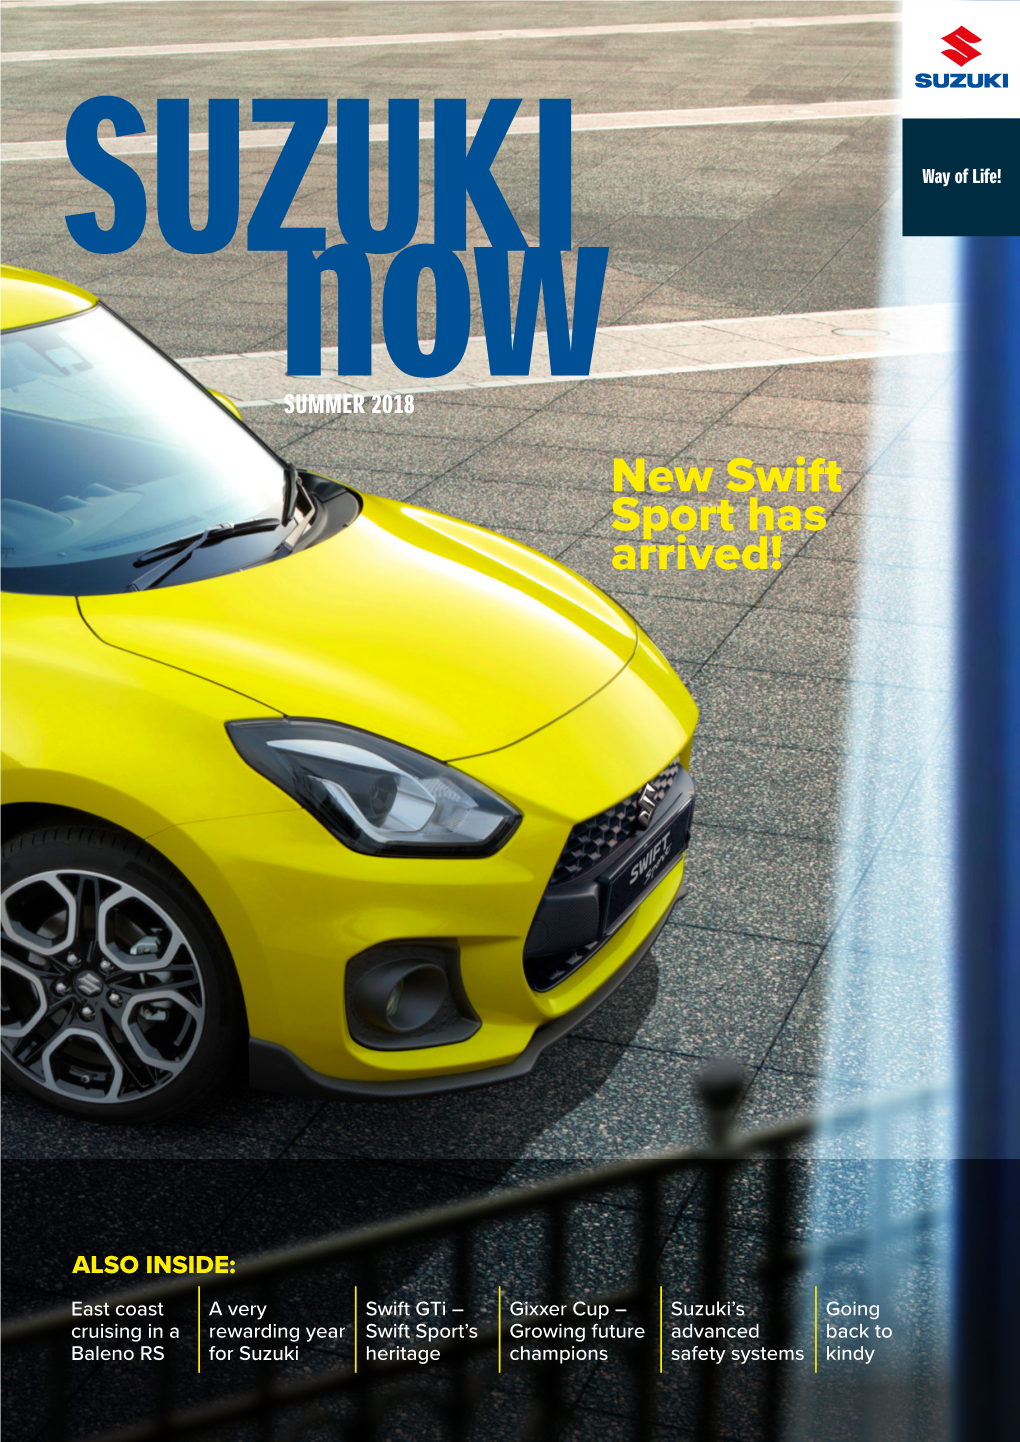 New Swift Sport Has Arrived!